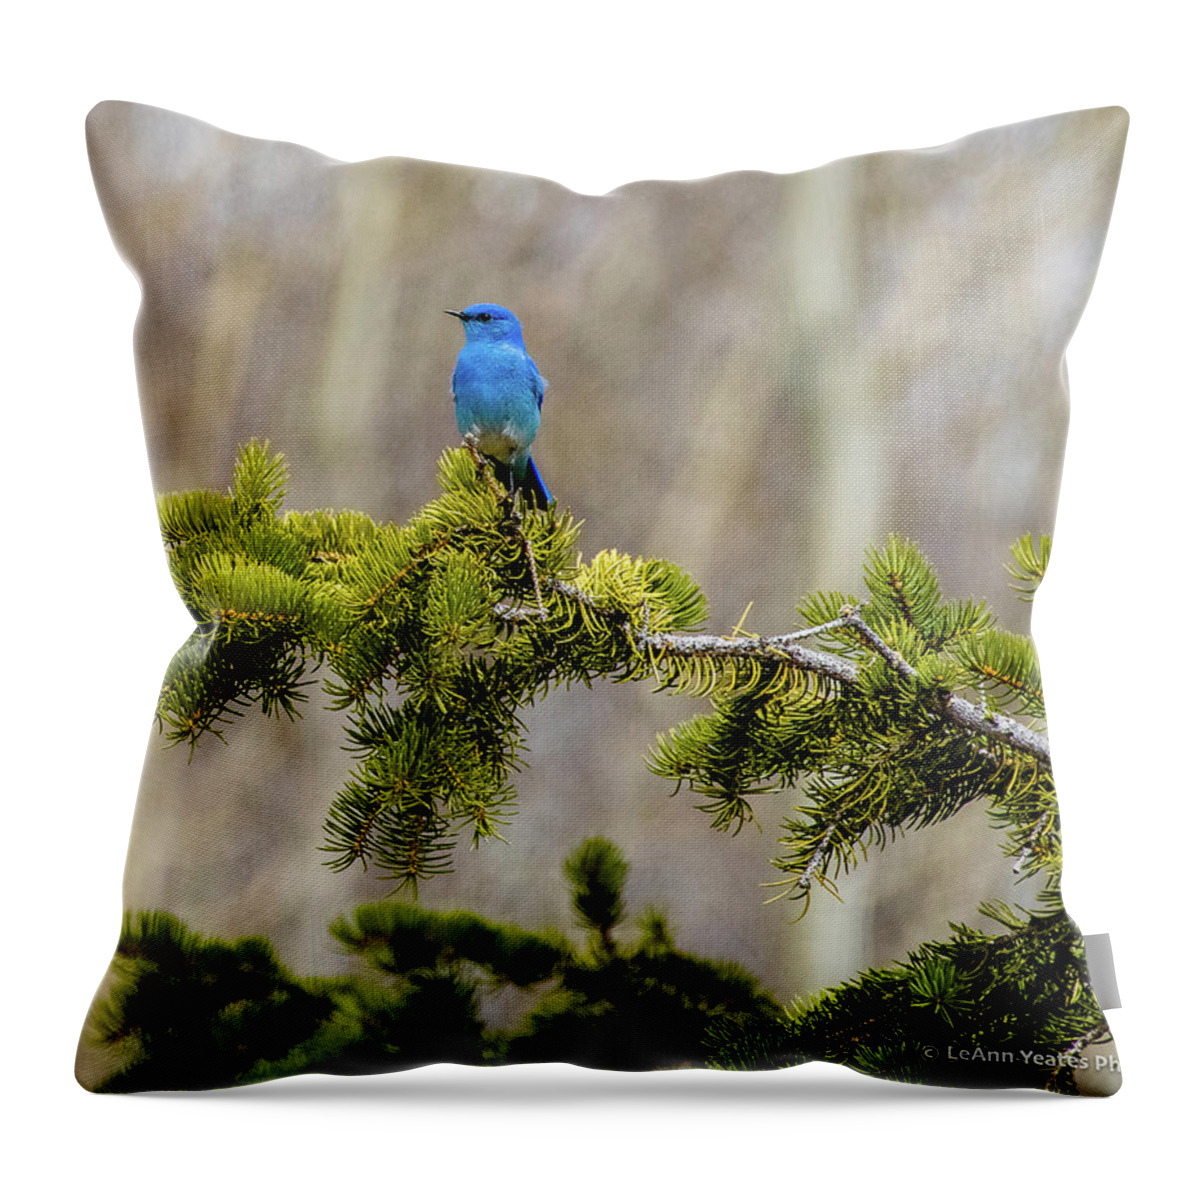 Bluebird Throw Pillow featuring the photograph Notice The Pretty Bluebird by Yeates Photography